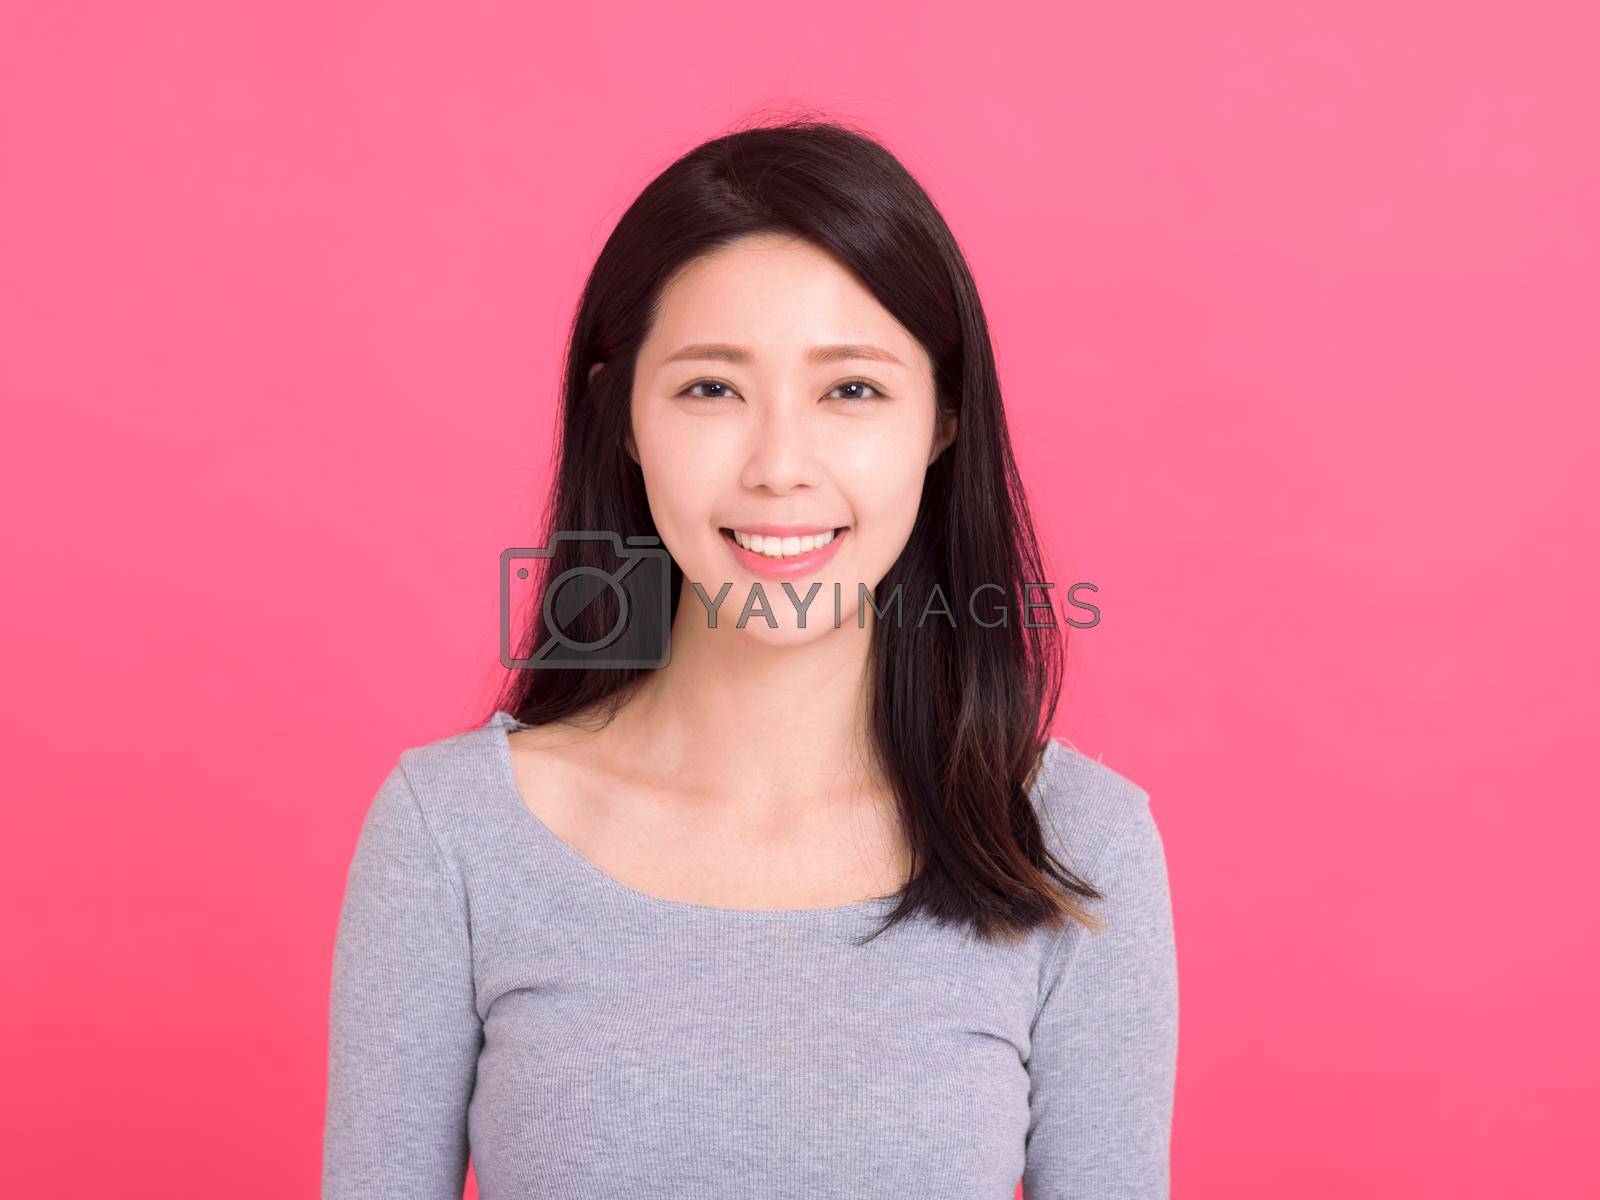 Royalty free image of Portrait of beautiful asian woman with long hair and makeup by tomwang